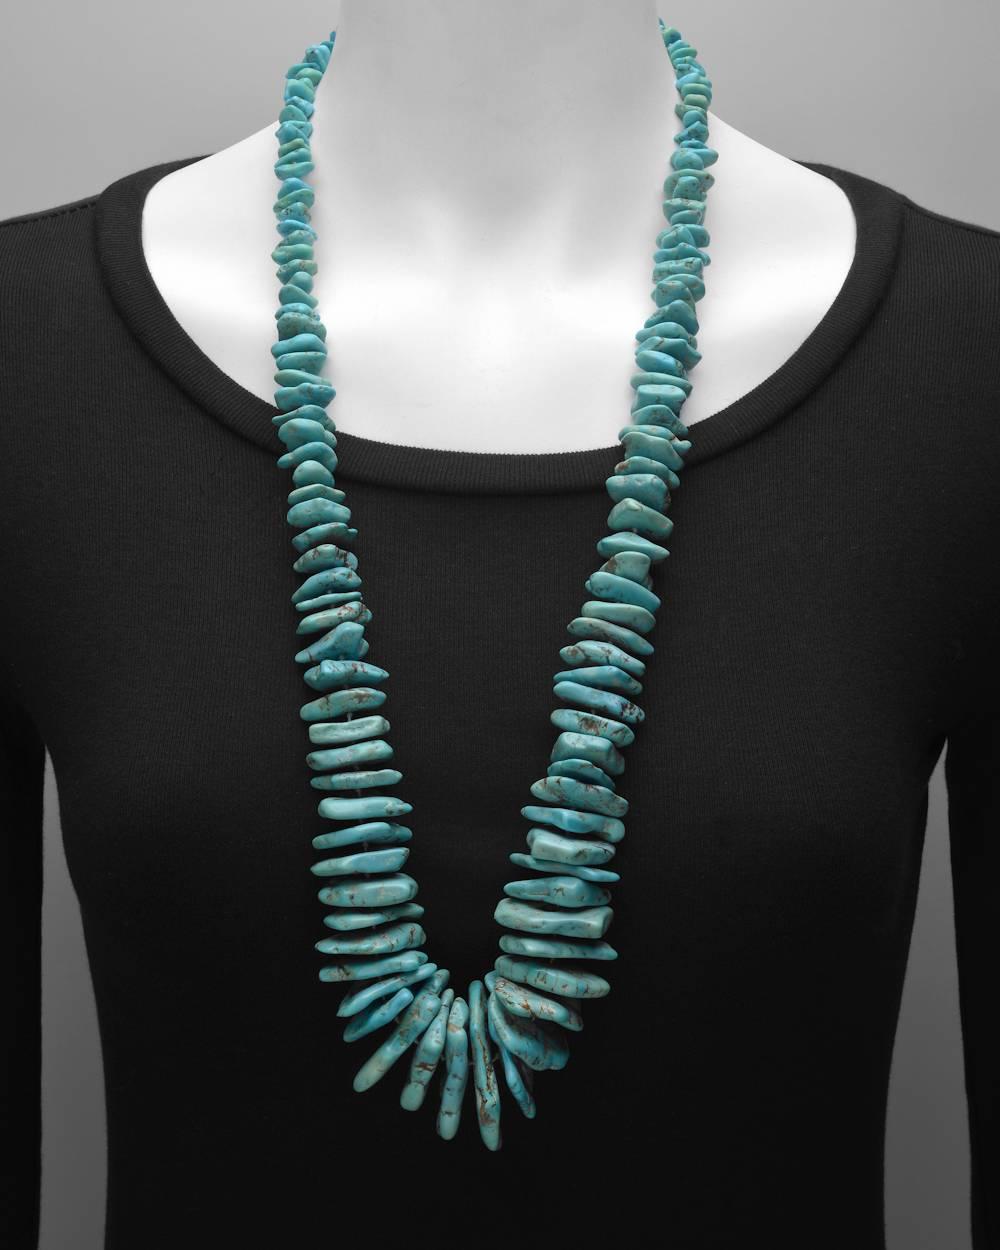 Turquoise bead long necklace, composed of graduated rough turquoise beads, strung on a silk cord, with a silver hook clasp.